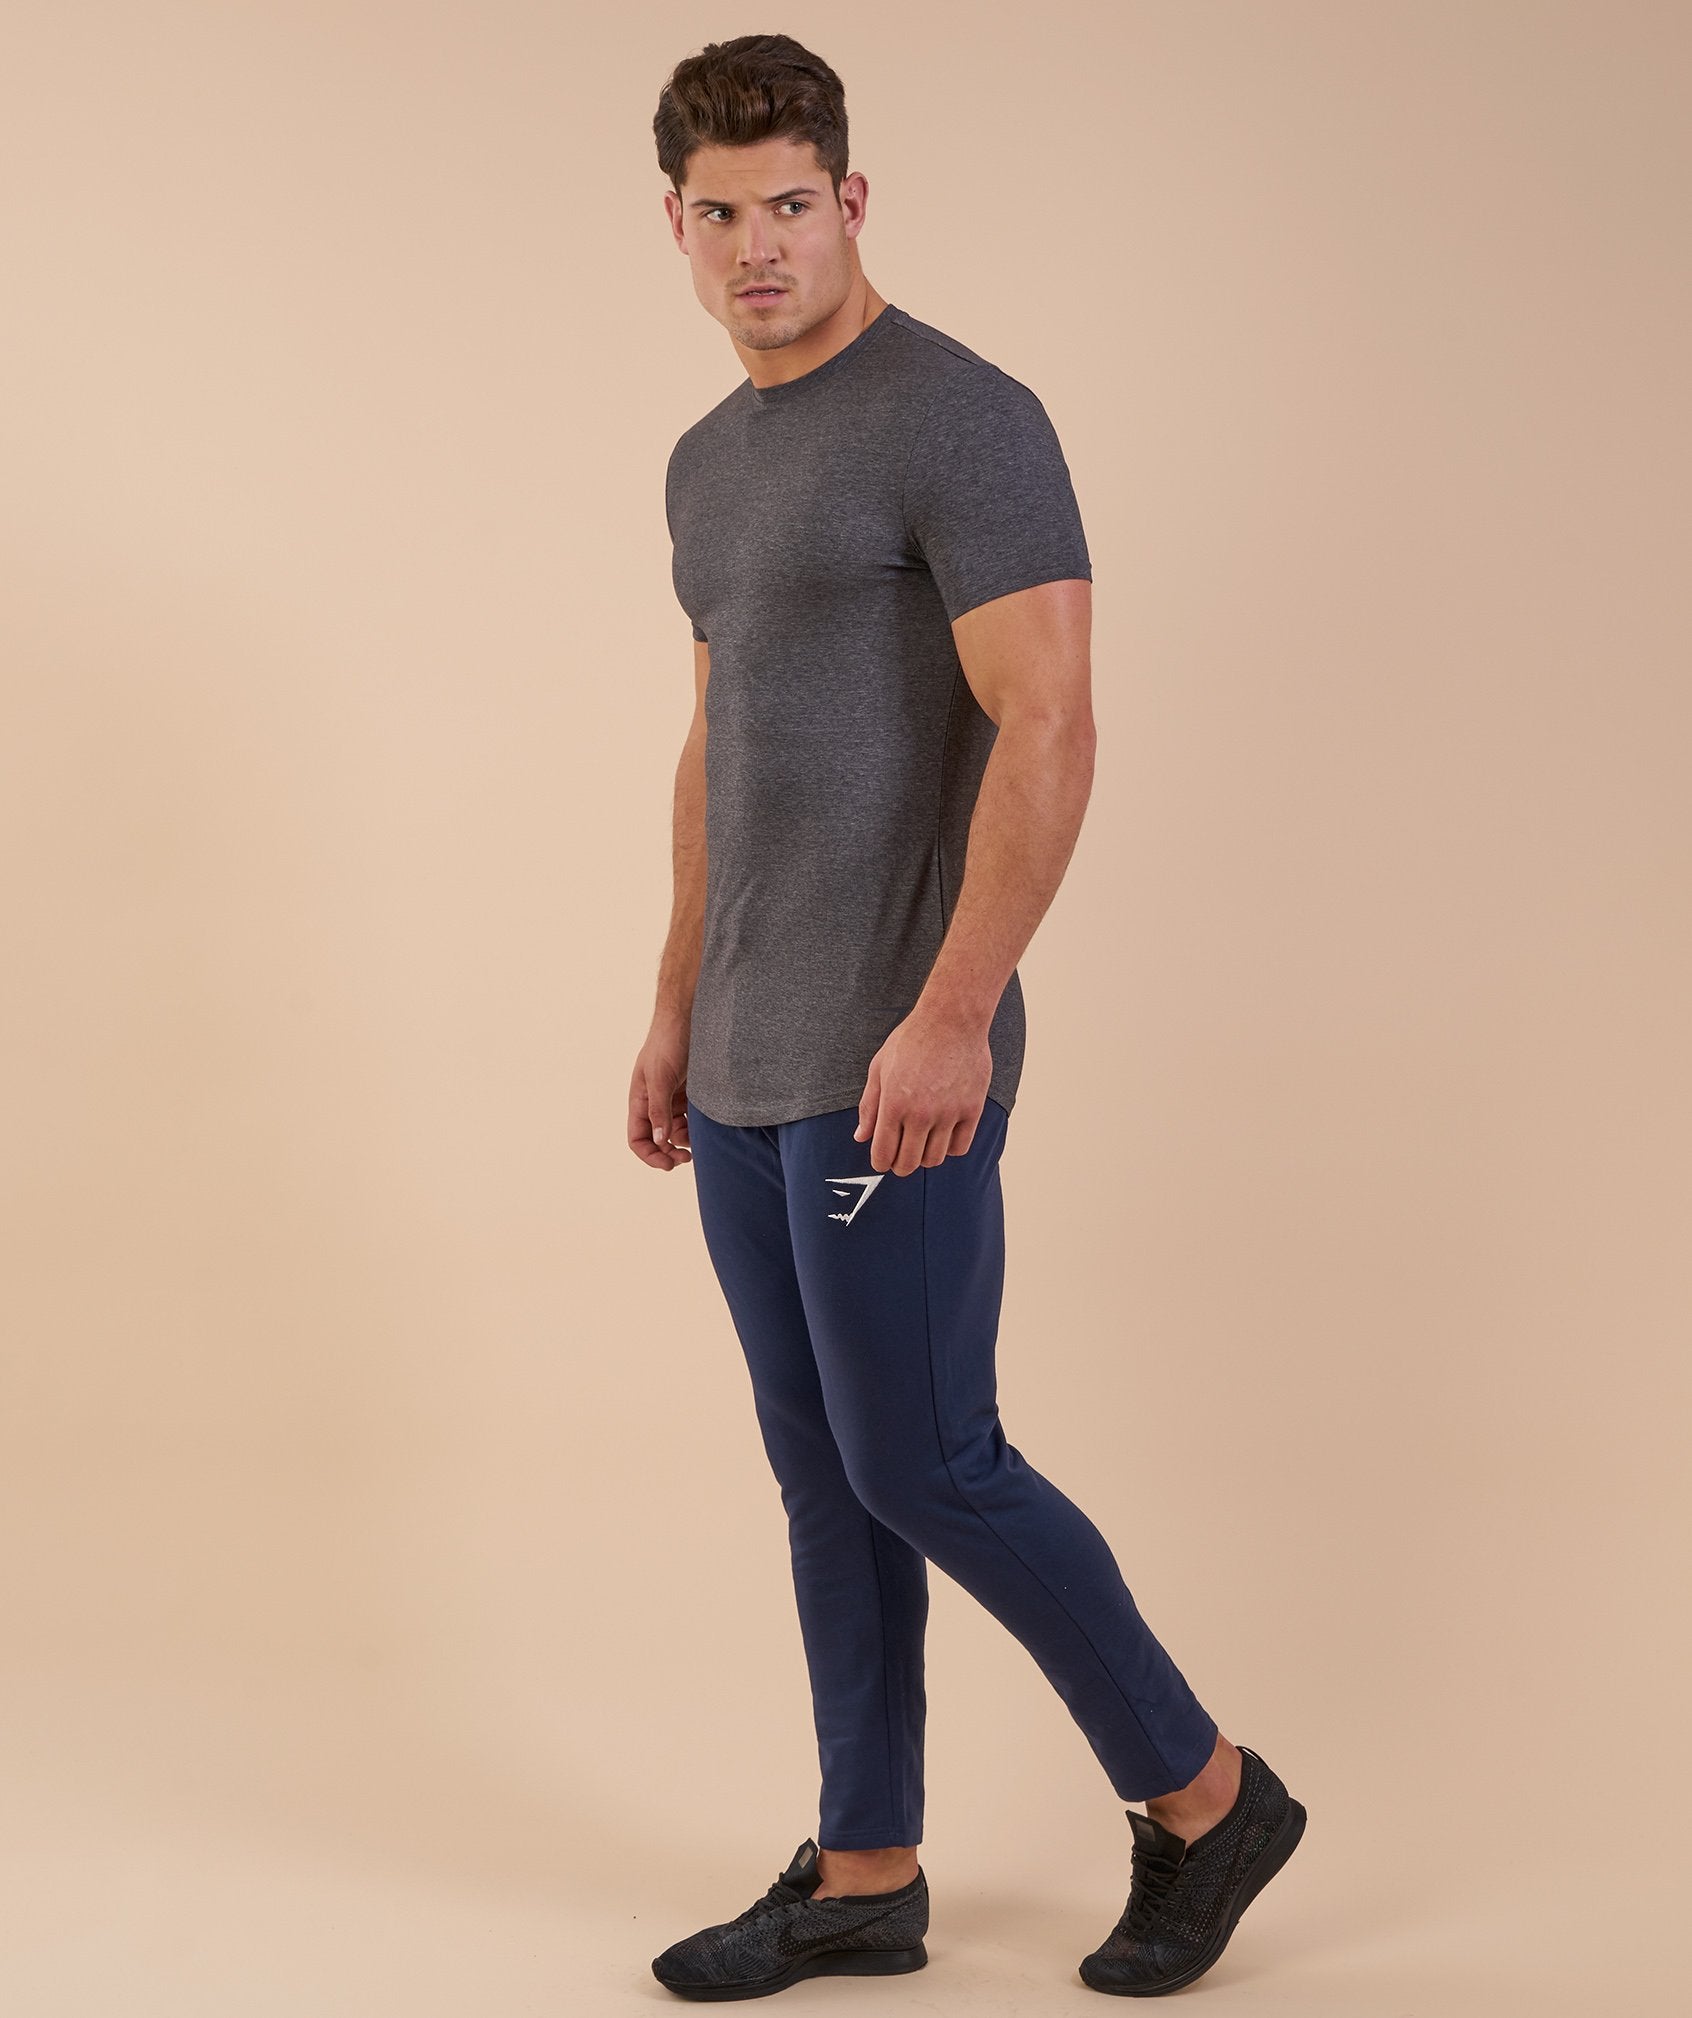 Solace Longline T-Shirt in Charcoal Marl - view 5